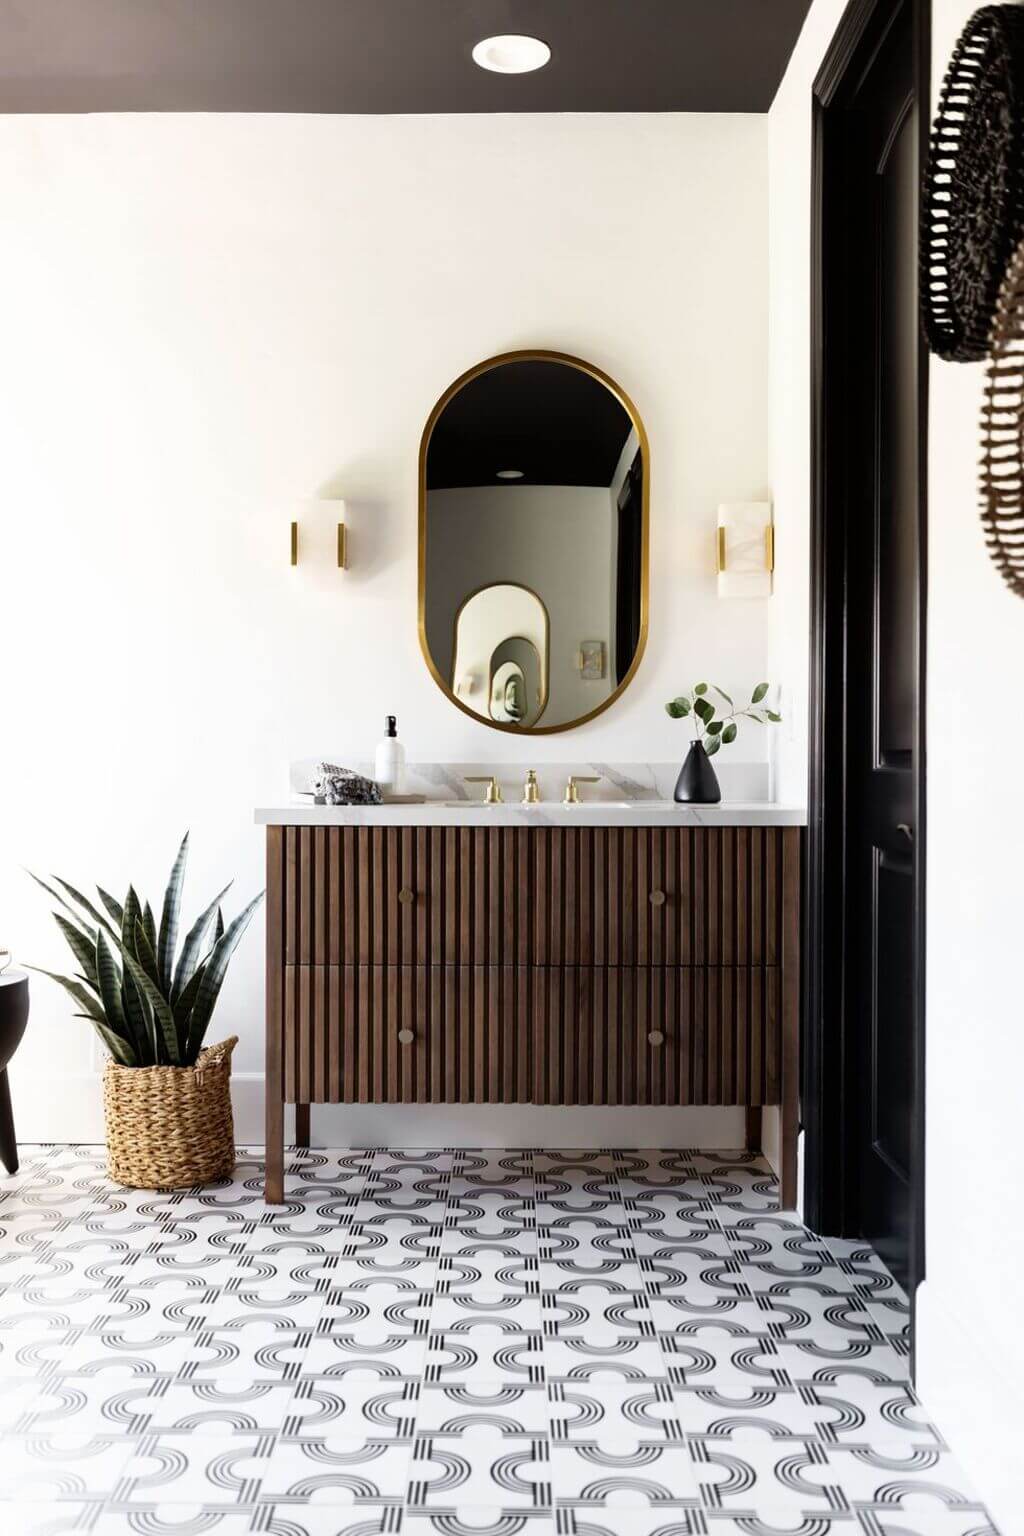 A bathroom with a sink, mirror and potted plant
